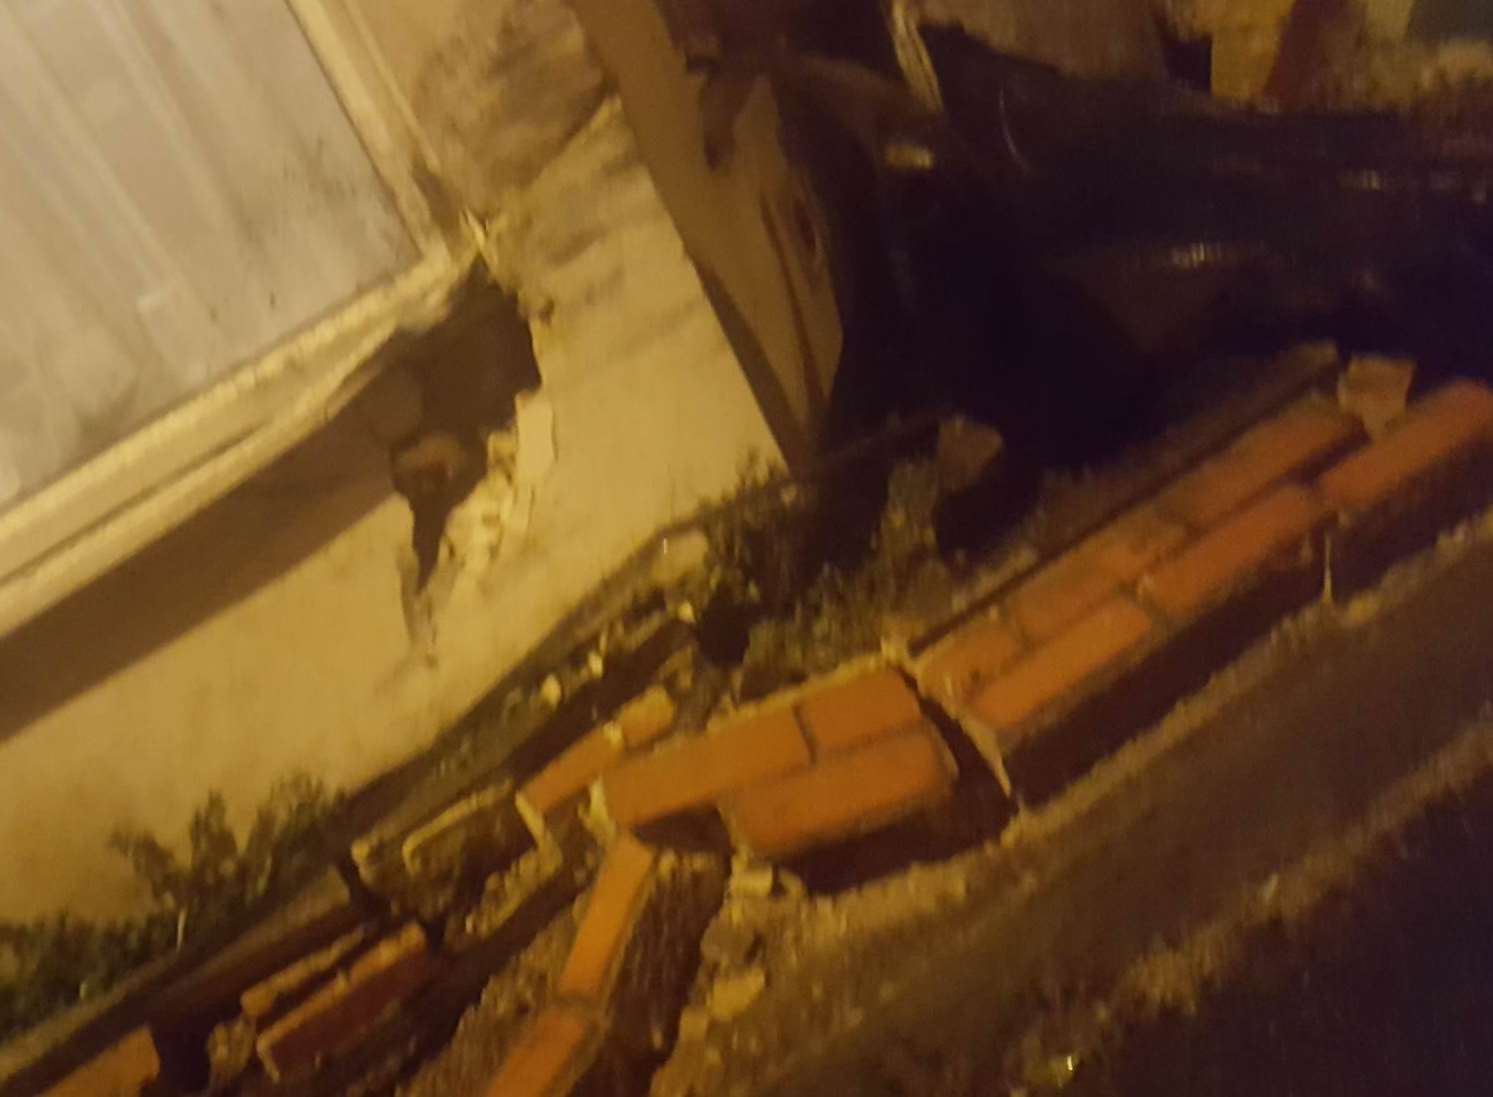 The car hit a nearby house